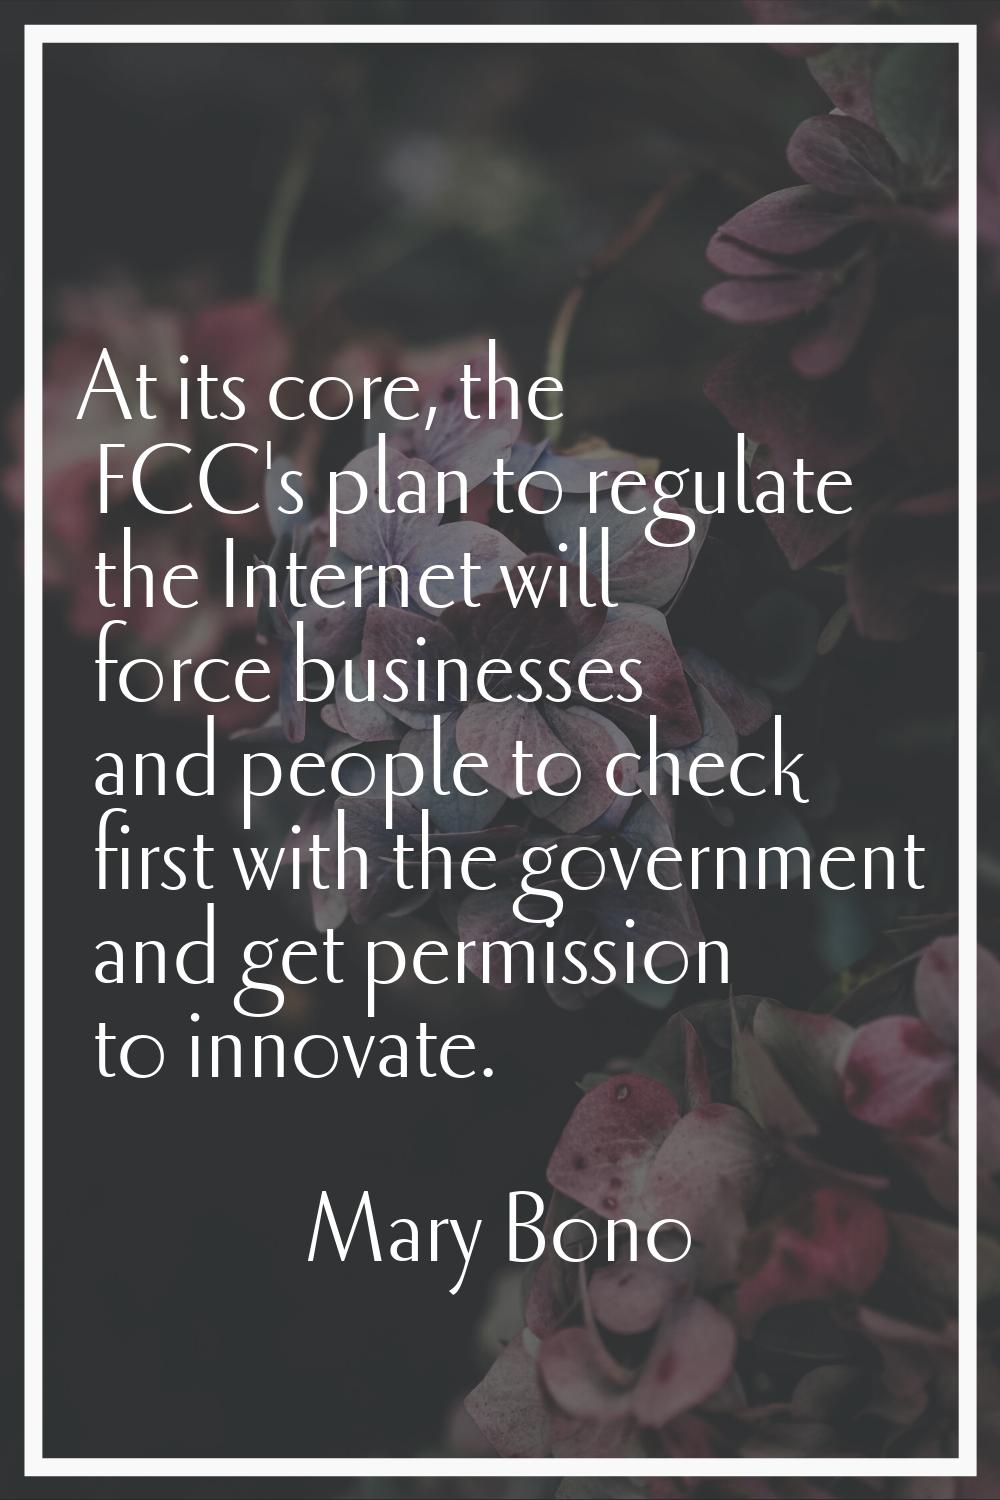 At its core, the FCC's plan to regulate the Internet will force businesses and people to check firs